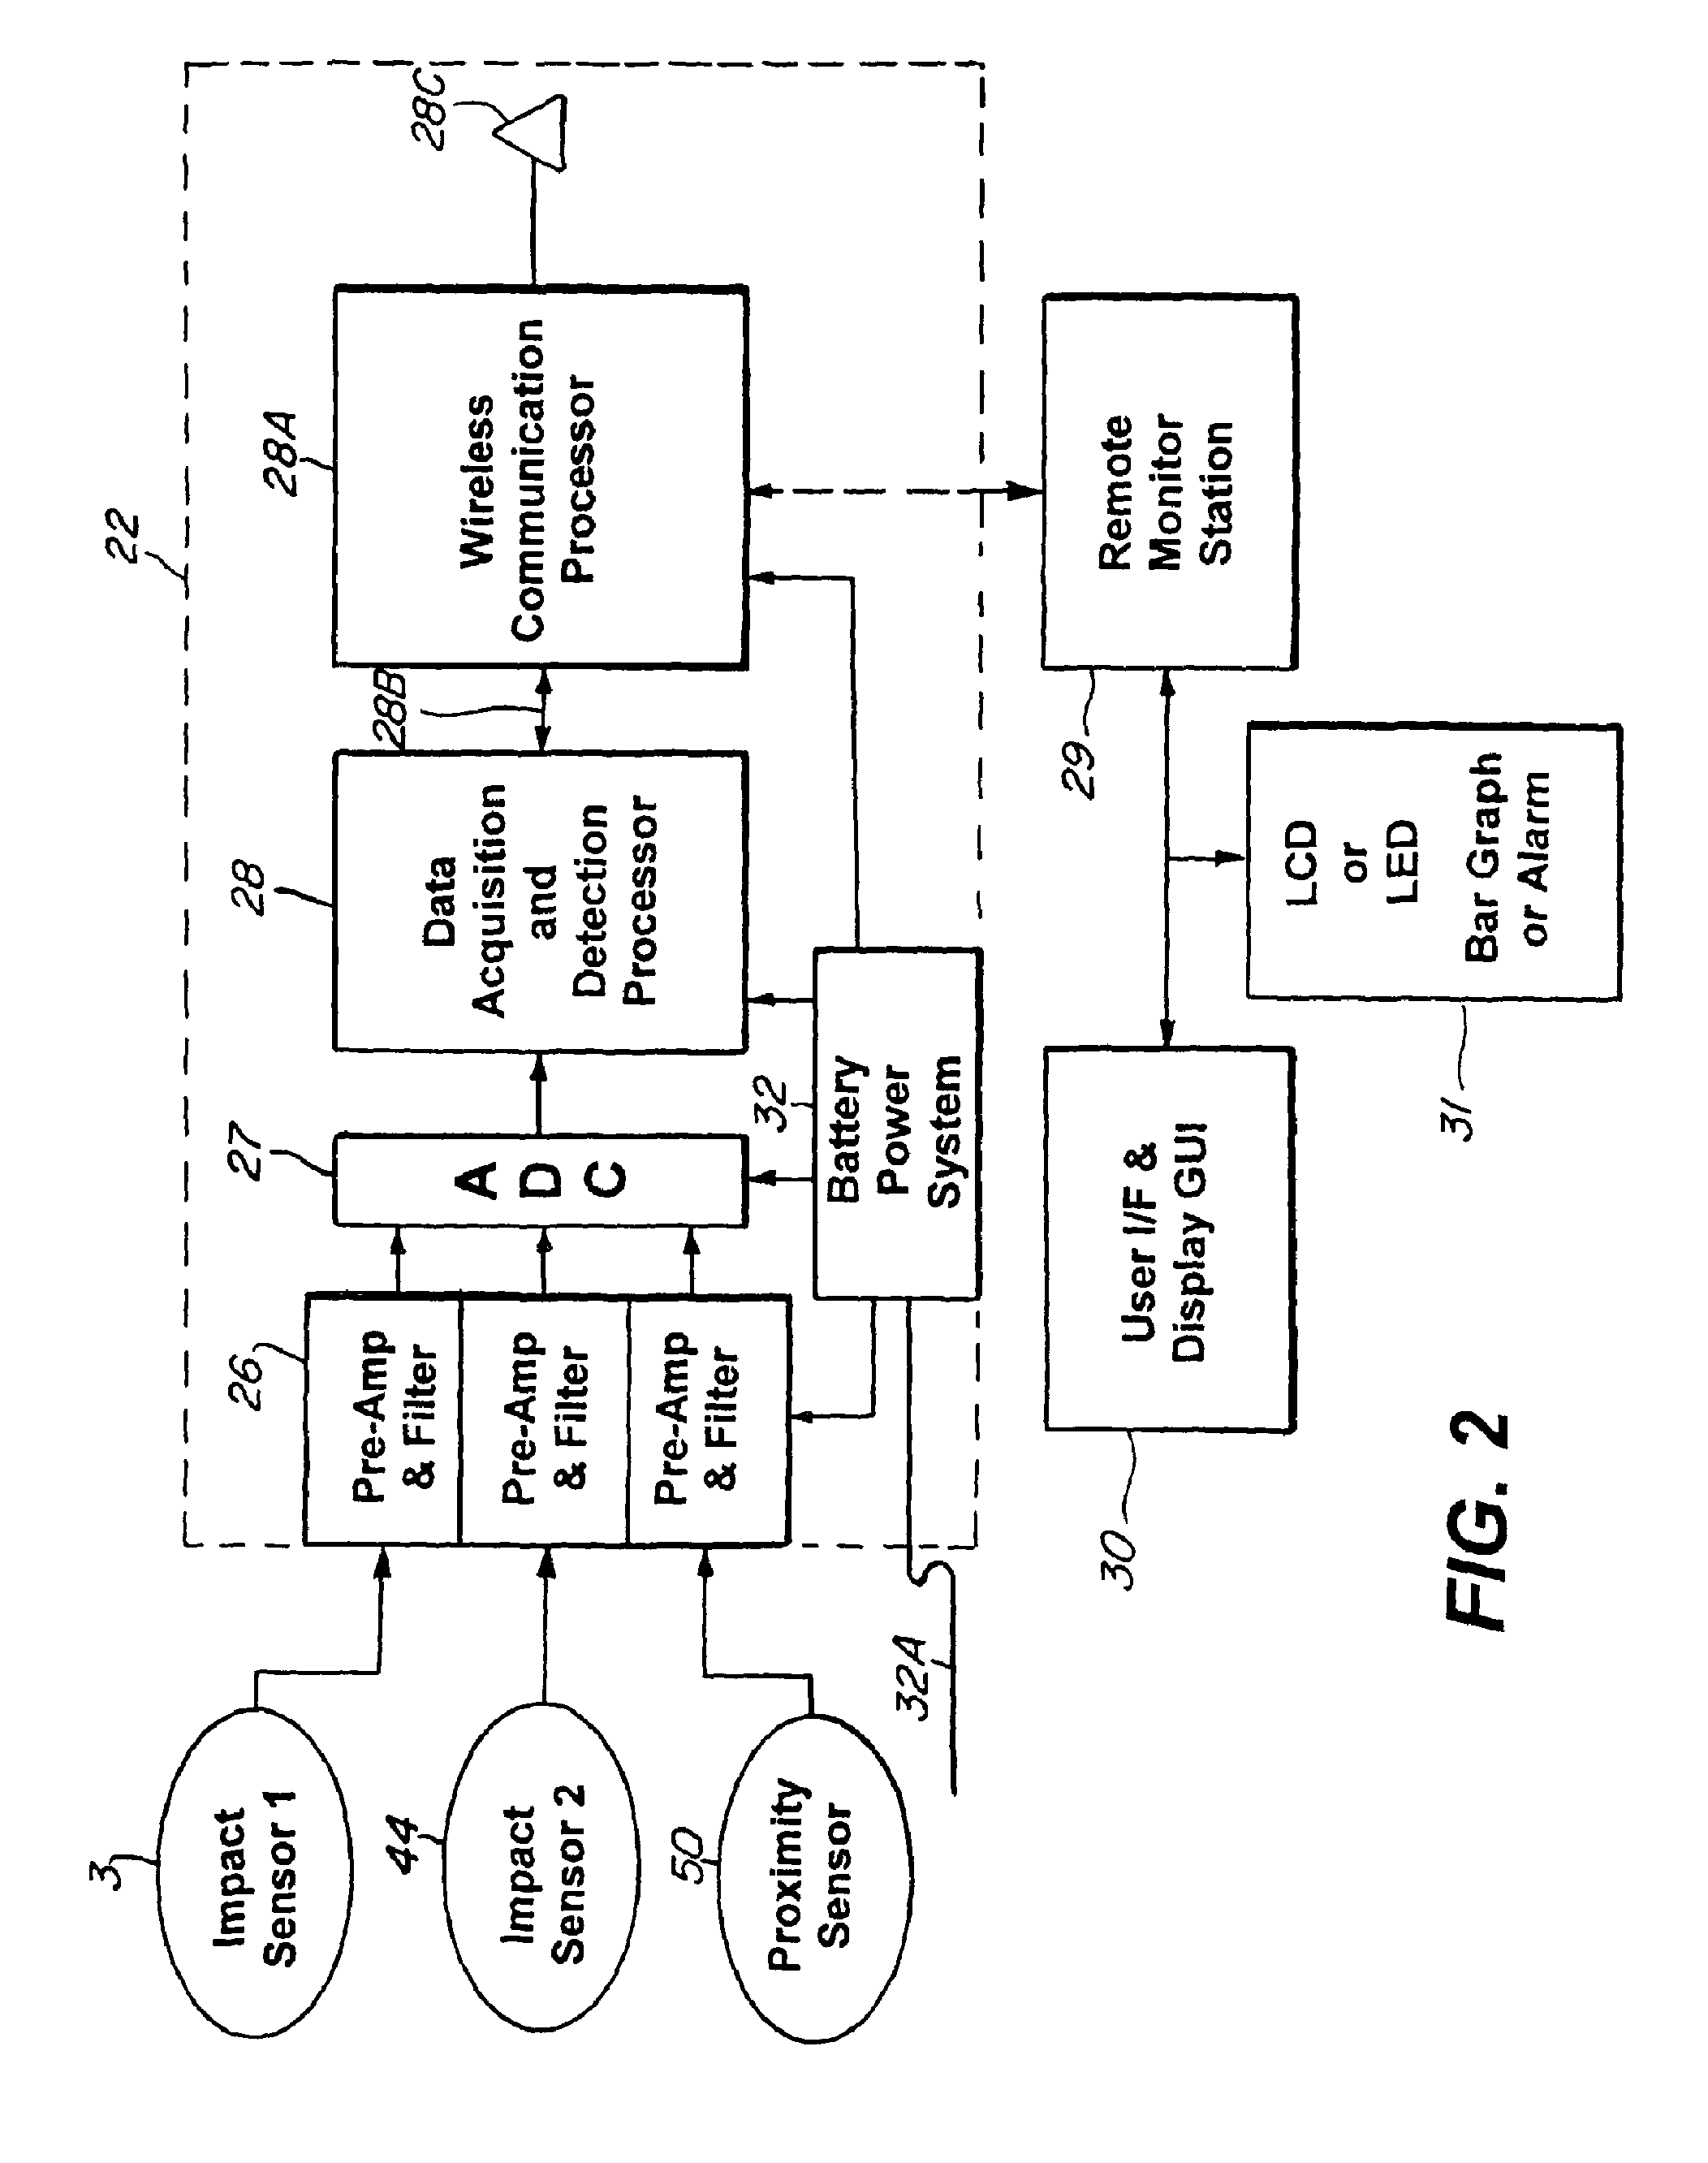 Apparatus for monitoring and registering the location and intensity of impact in sports